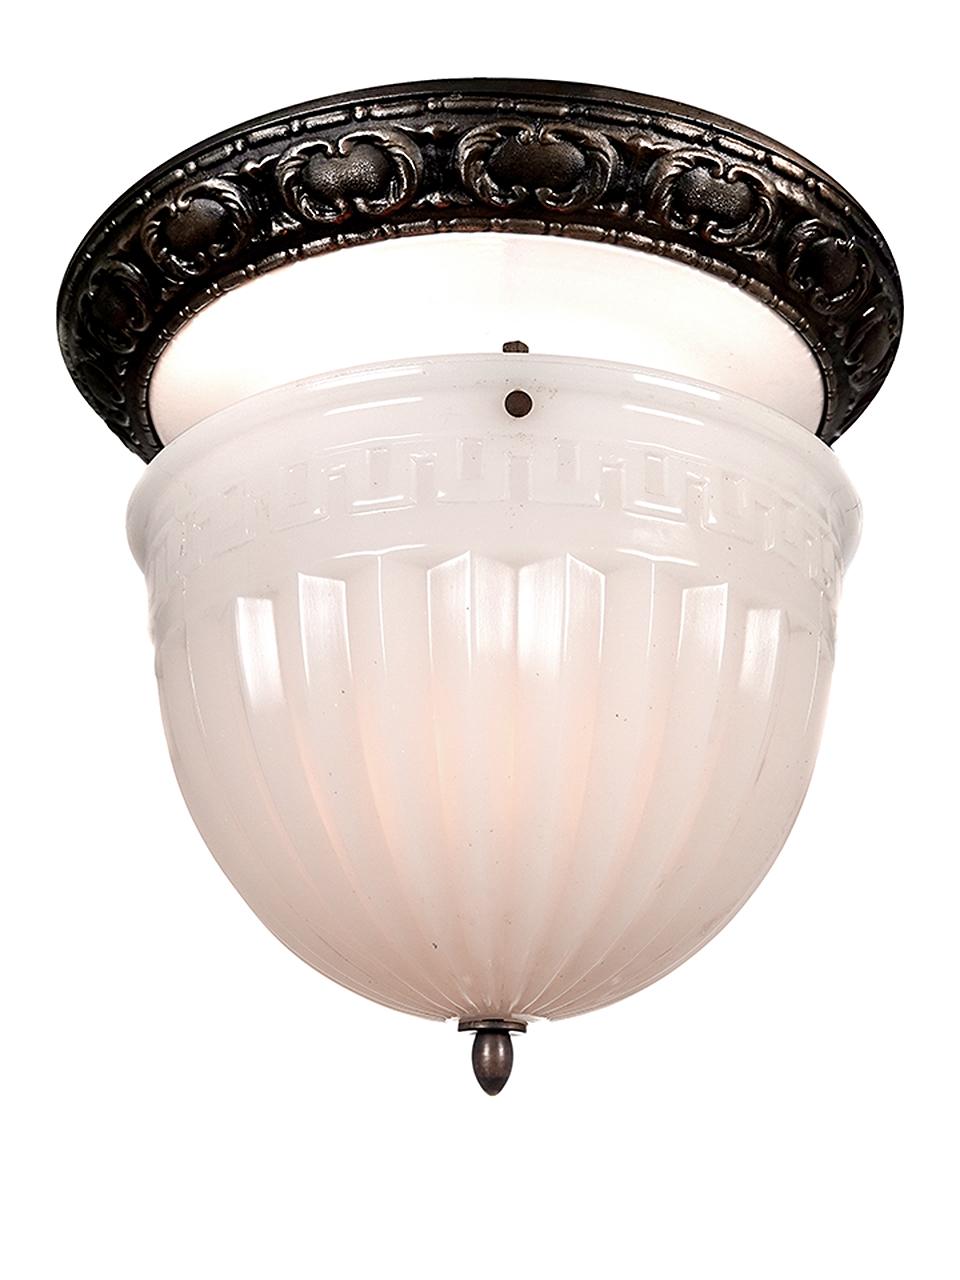 Brascolite fixtures have always been popular because of their quality glass and construction. The large dome with its fluted and Greek Key pattern is almost .5 in thick. The ceiling crown is white porcelain with a decorative iron ring. The look is